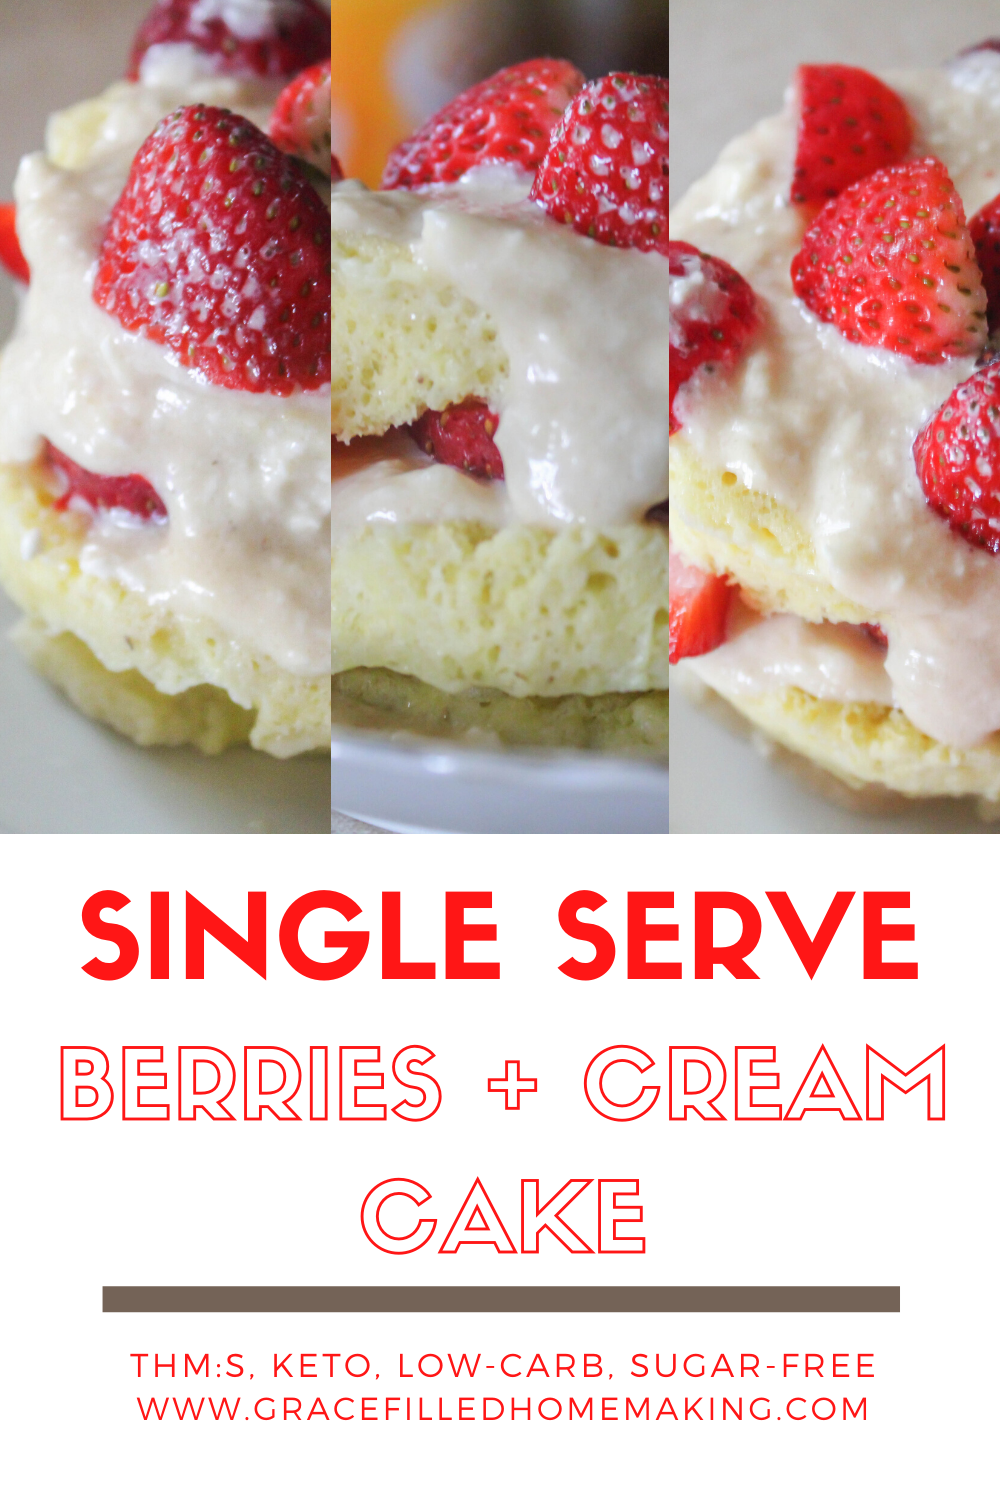 My single serve berries and cream cake is a great summer dessert for one! A spongy cake topped by a cream cheese icing and fresh berries. Yum!